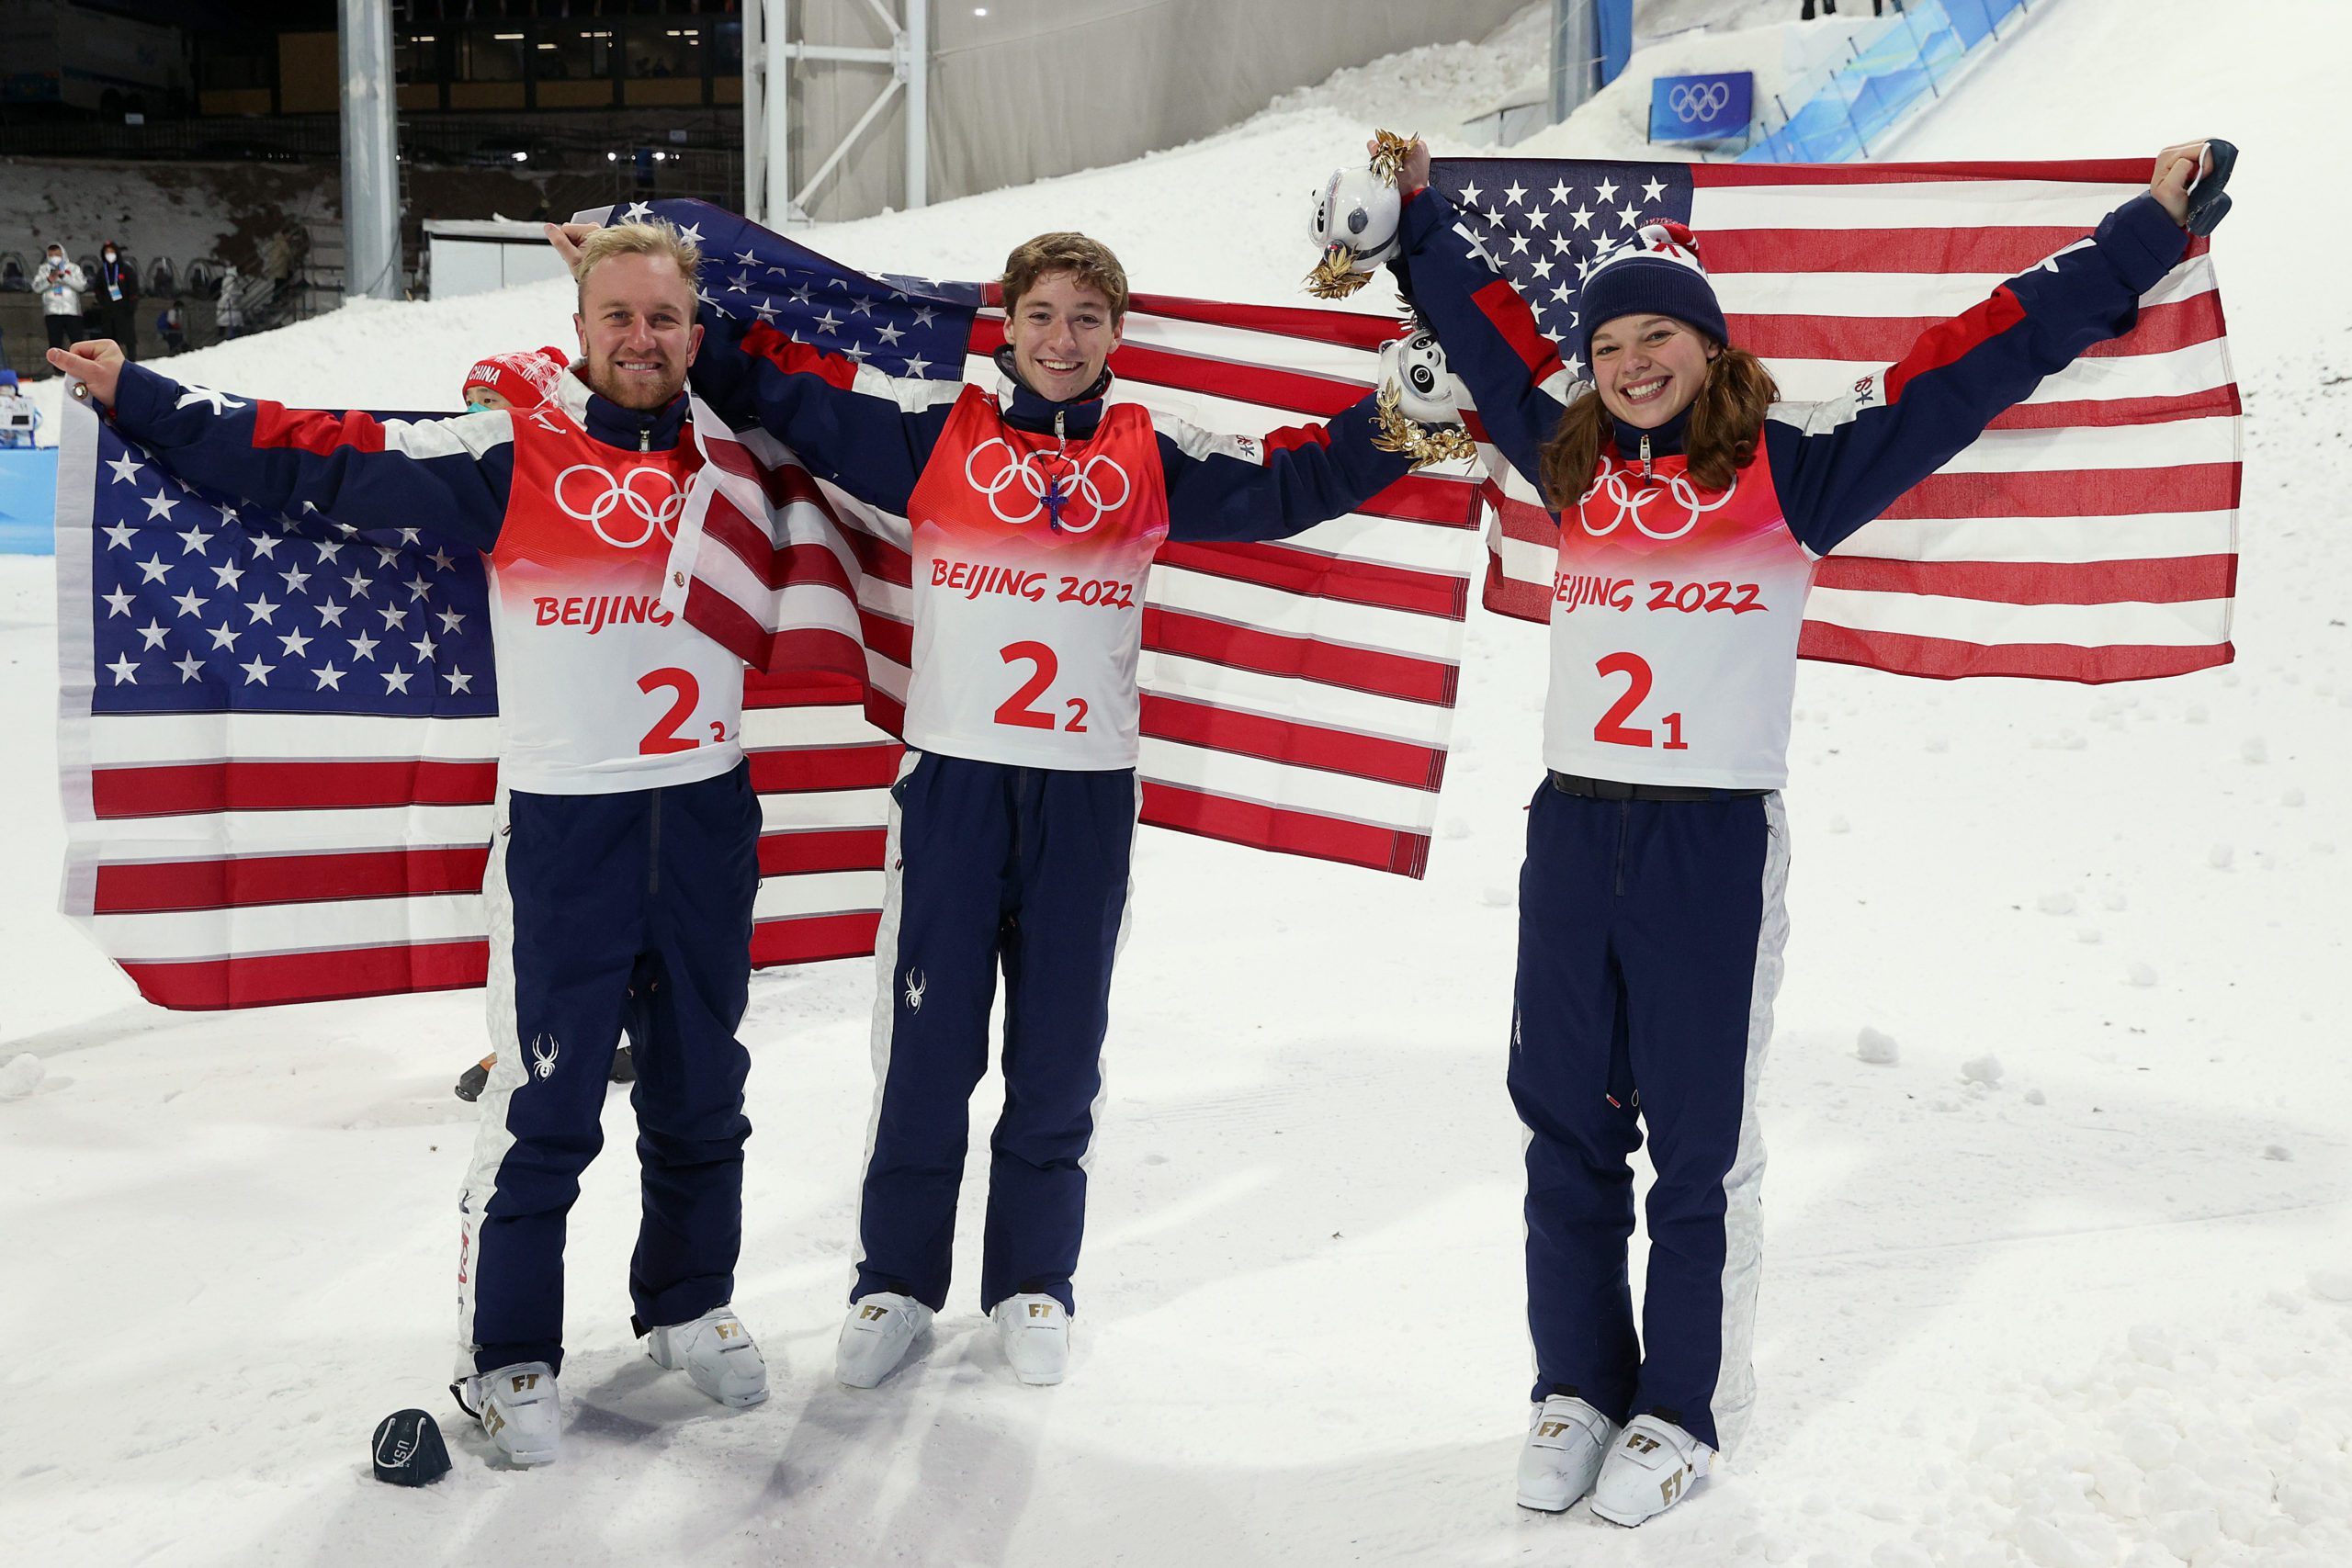 ZHANGJIAKOU, CHINA - FEBRUARY 10: (L-R) Gold medallists Justin Schoenefeld, Christopher Lillis and Ashley Caldwell of Team United States pose during the Freestyle Skiing Mixed Team Aerials flower ceremony on Day 6 of the Beijing 2022 Winter Olympics at Genting Snow Park on February 10, 2022 in Zhangjiakou, China.